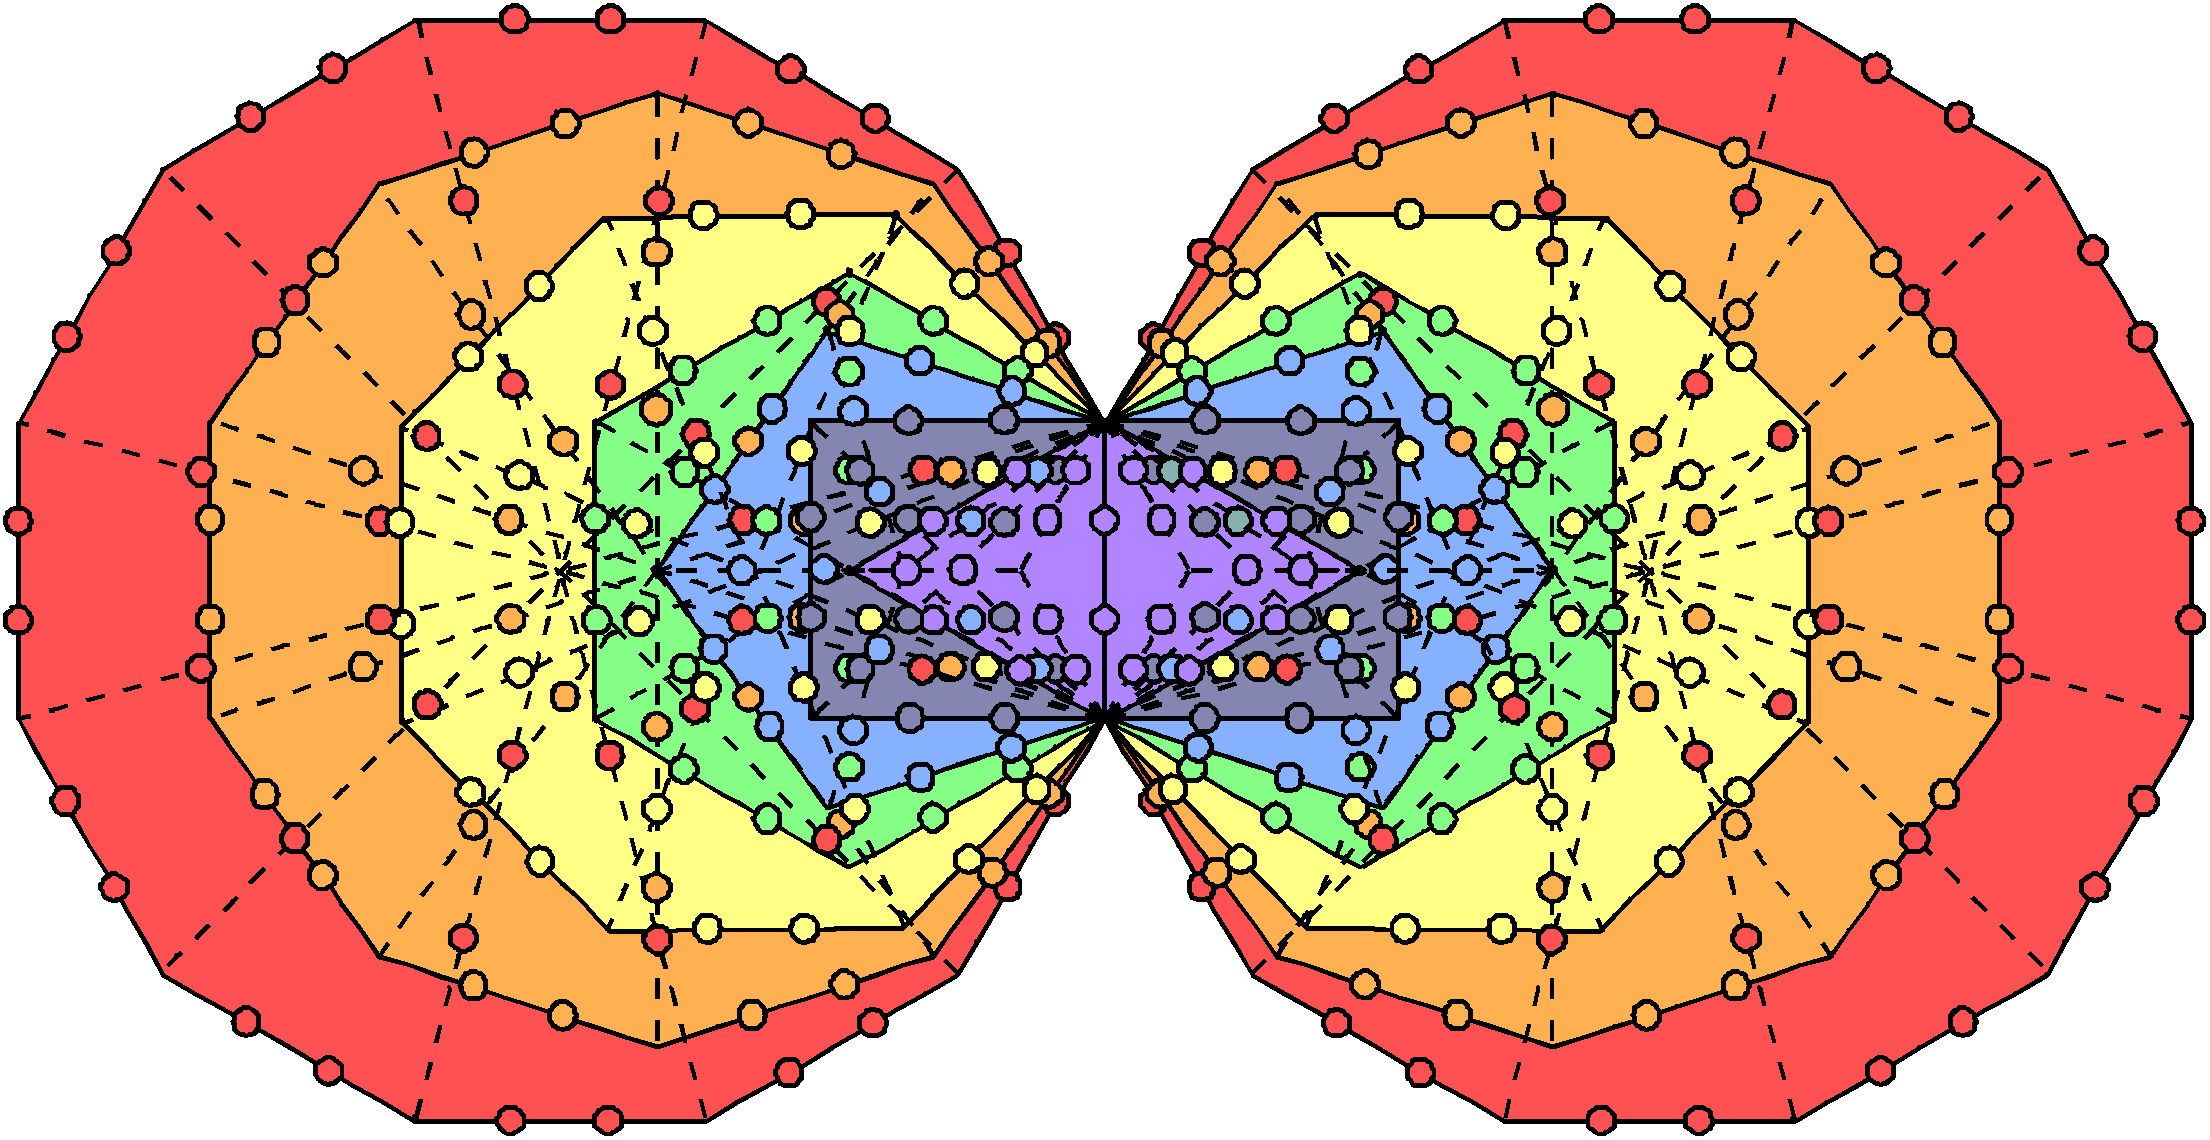 350 hexagonal yods line 94 tetractyses in (7+7) enfoldedType A polygons